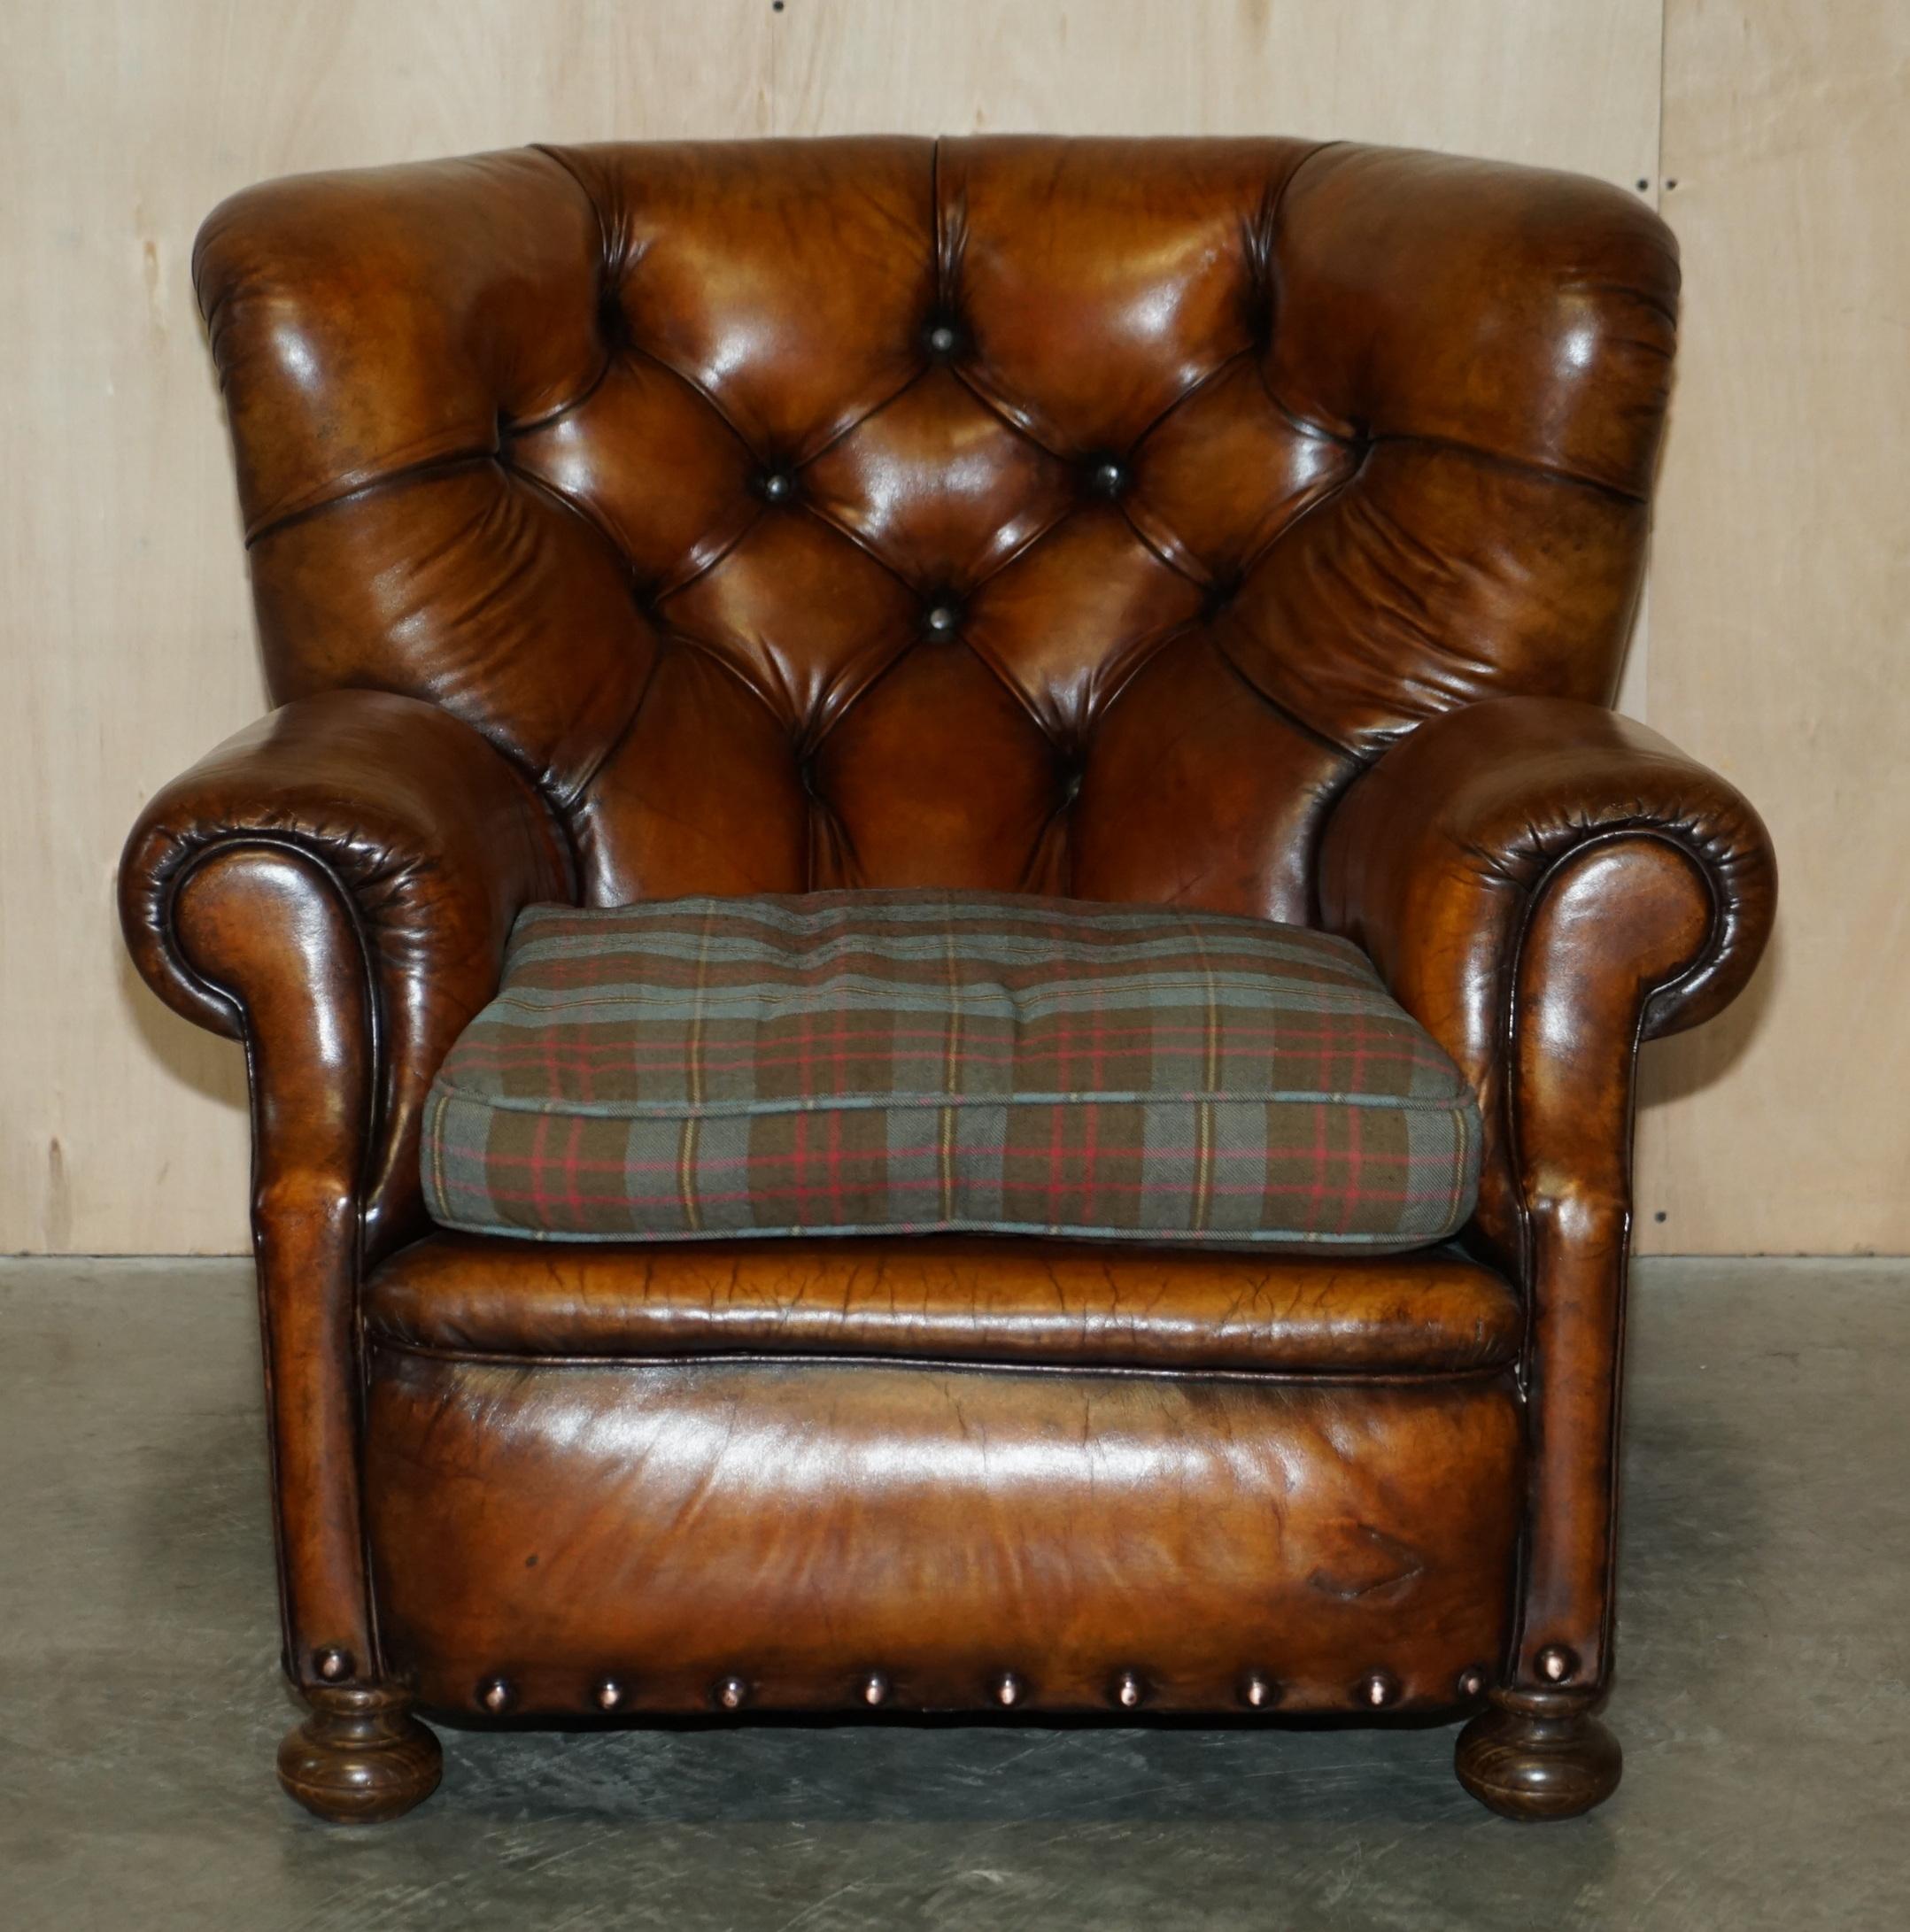 We are delighted to offer for sale this absolutely stunning, hand dyed saddle brown leather Victorian club armchair with Chesterfield tufting, wool tartan cushion and coil sprung front edge

A very well made, decorative and extremely comfortable